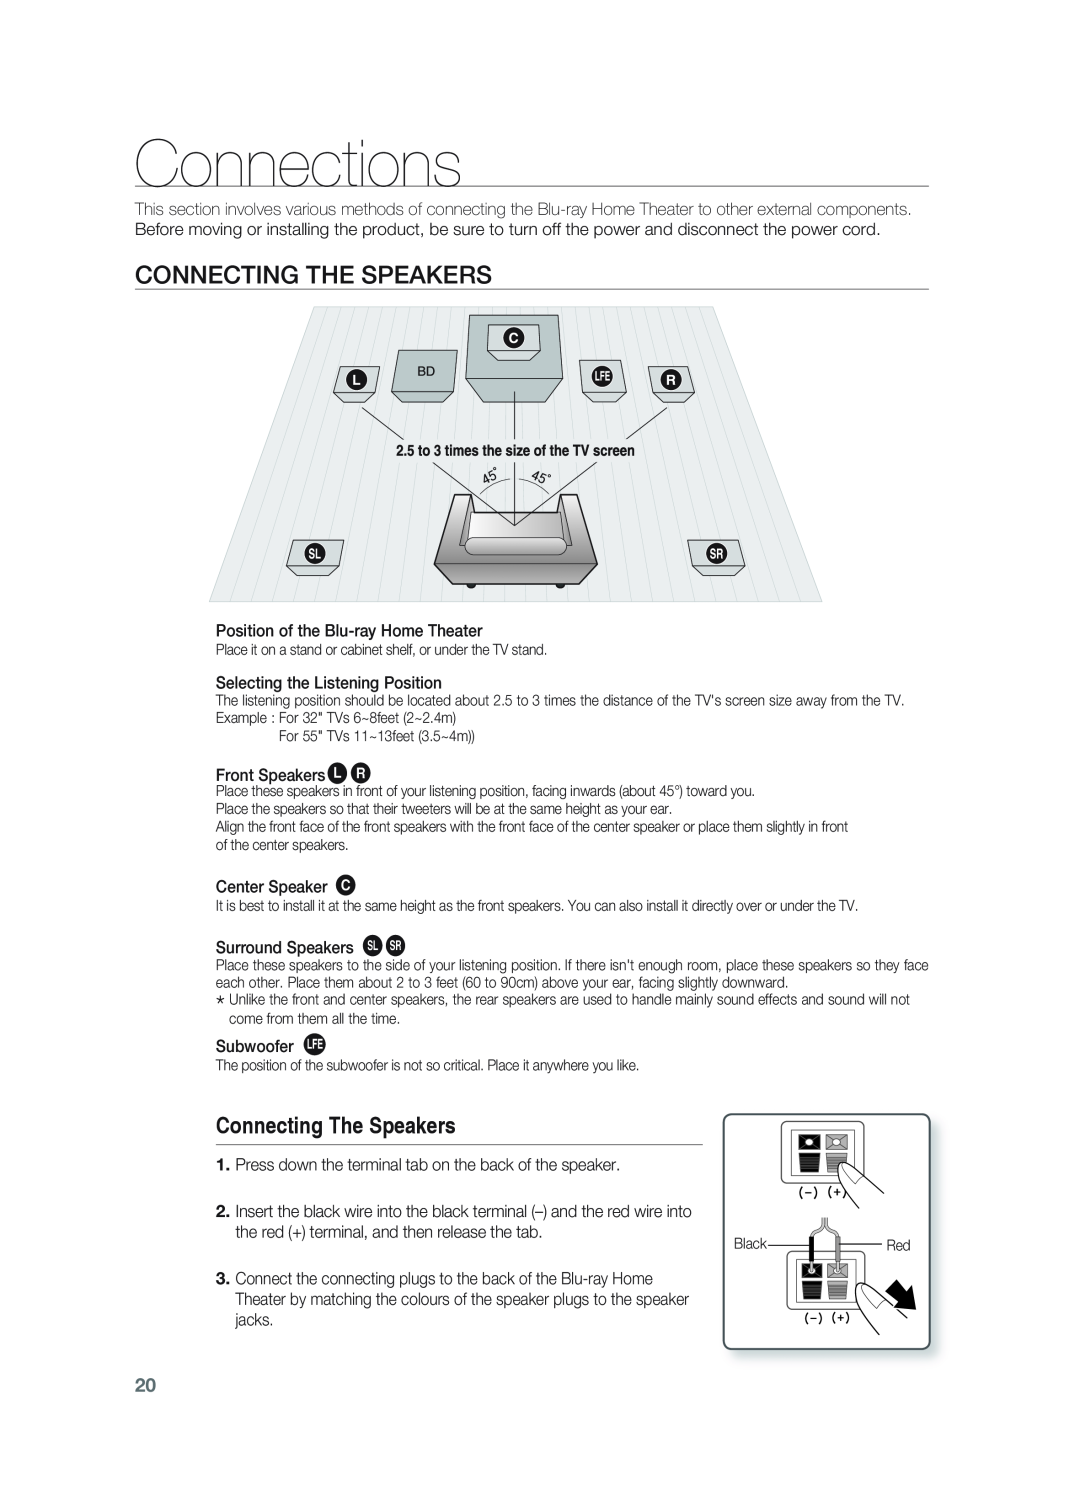 Samsung HT-BD1255, HT-BD1252 user manual Connections, Connecting The Speakers 